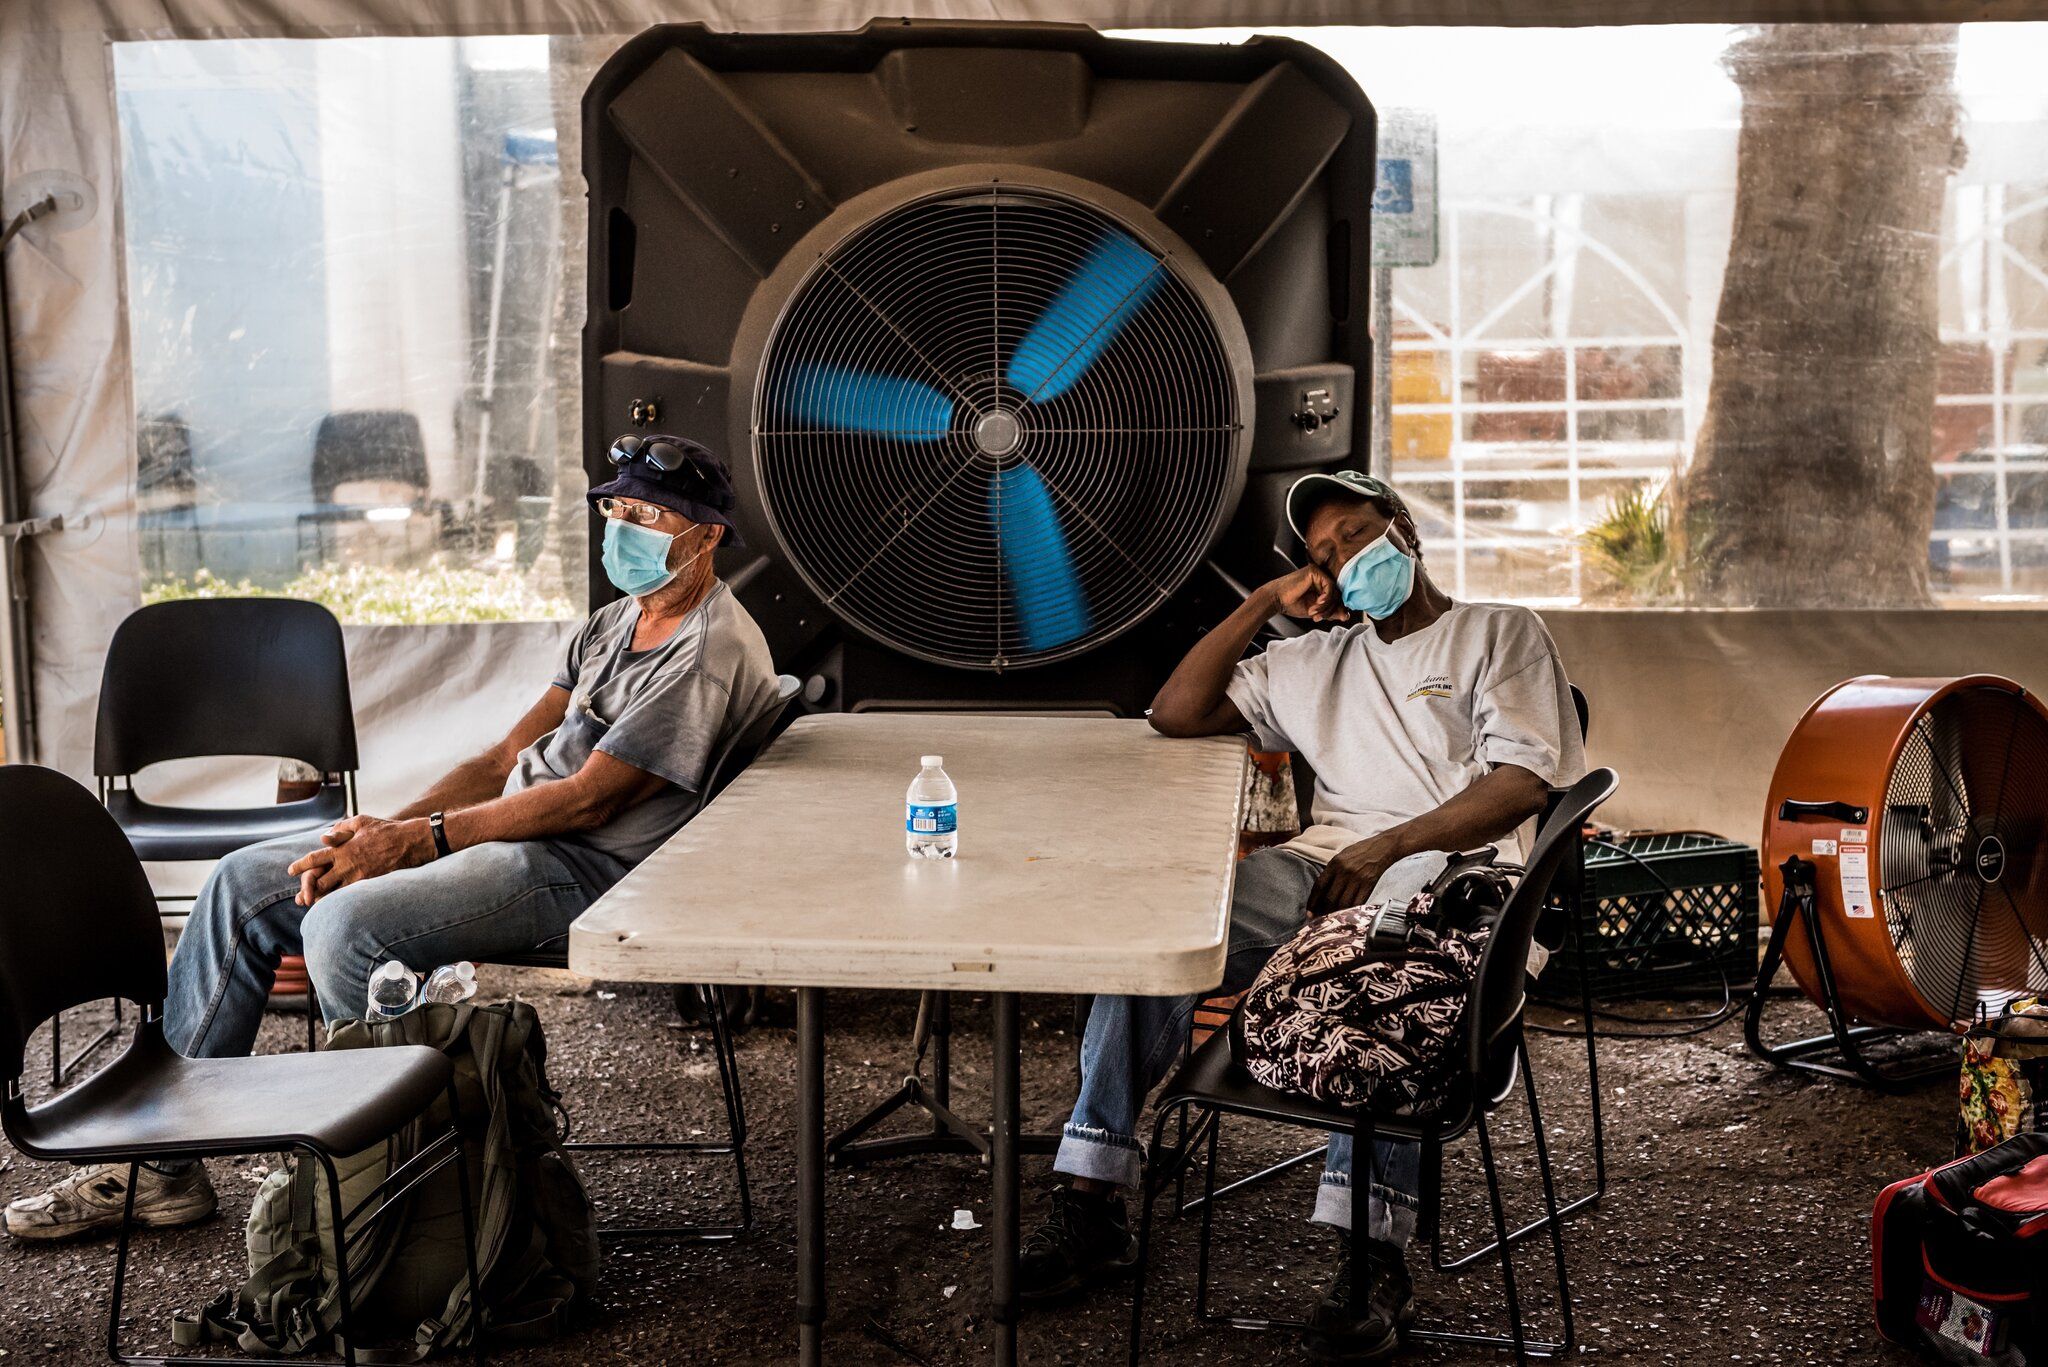 PHOENIX. People at a cooling center during Arizona’s record-setting heat wave. Image by Meridith Kohut. United States, 2020.